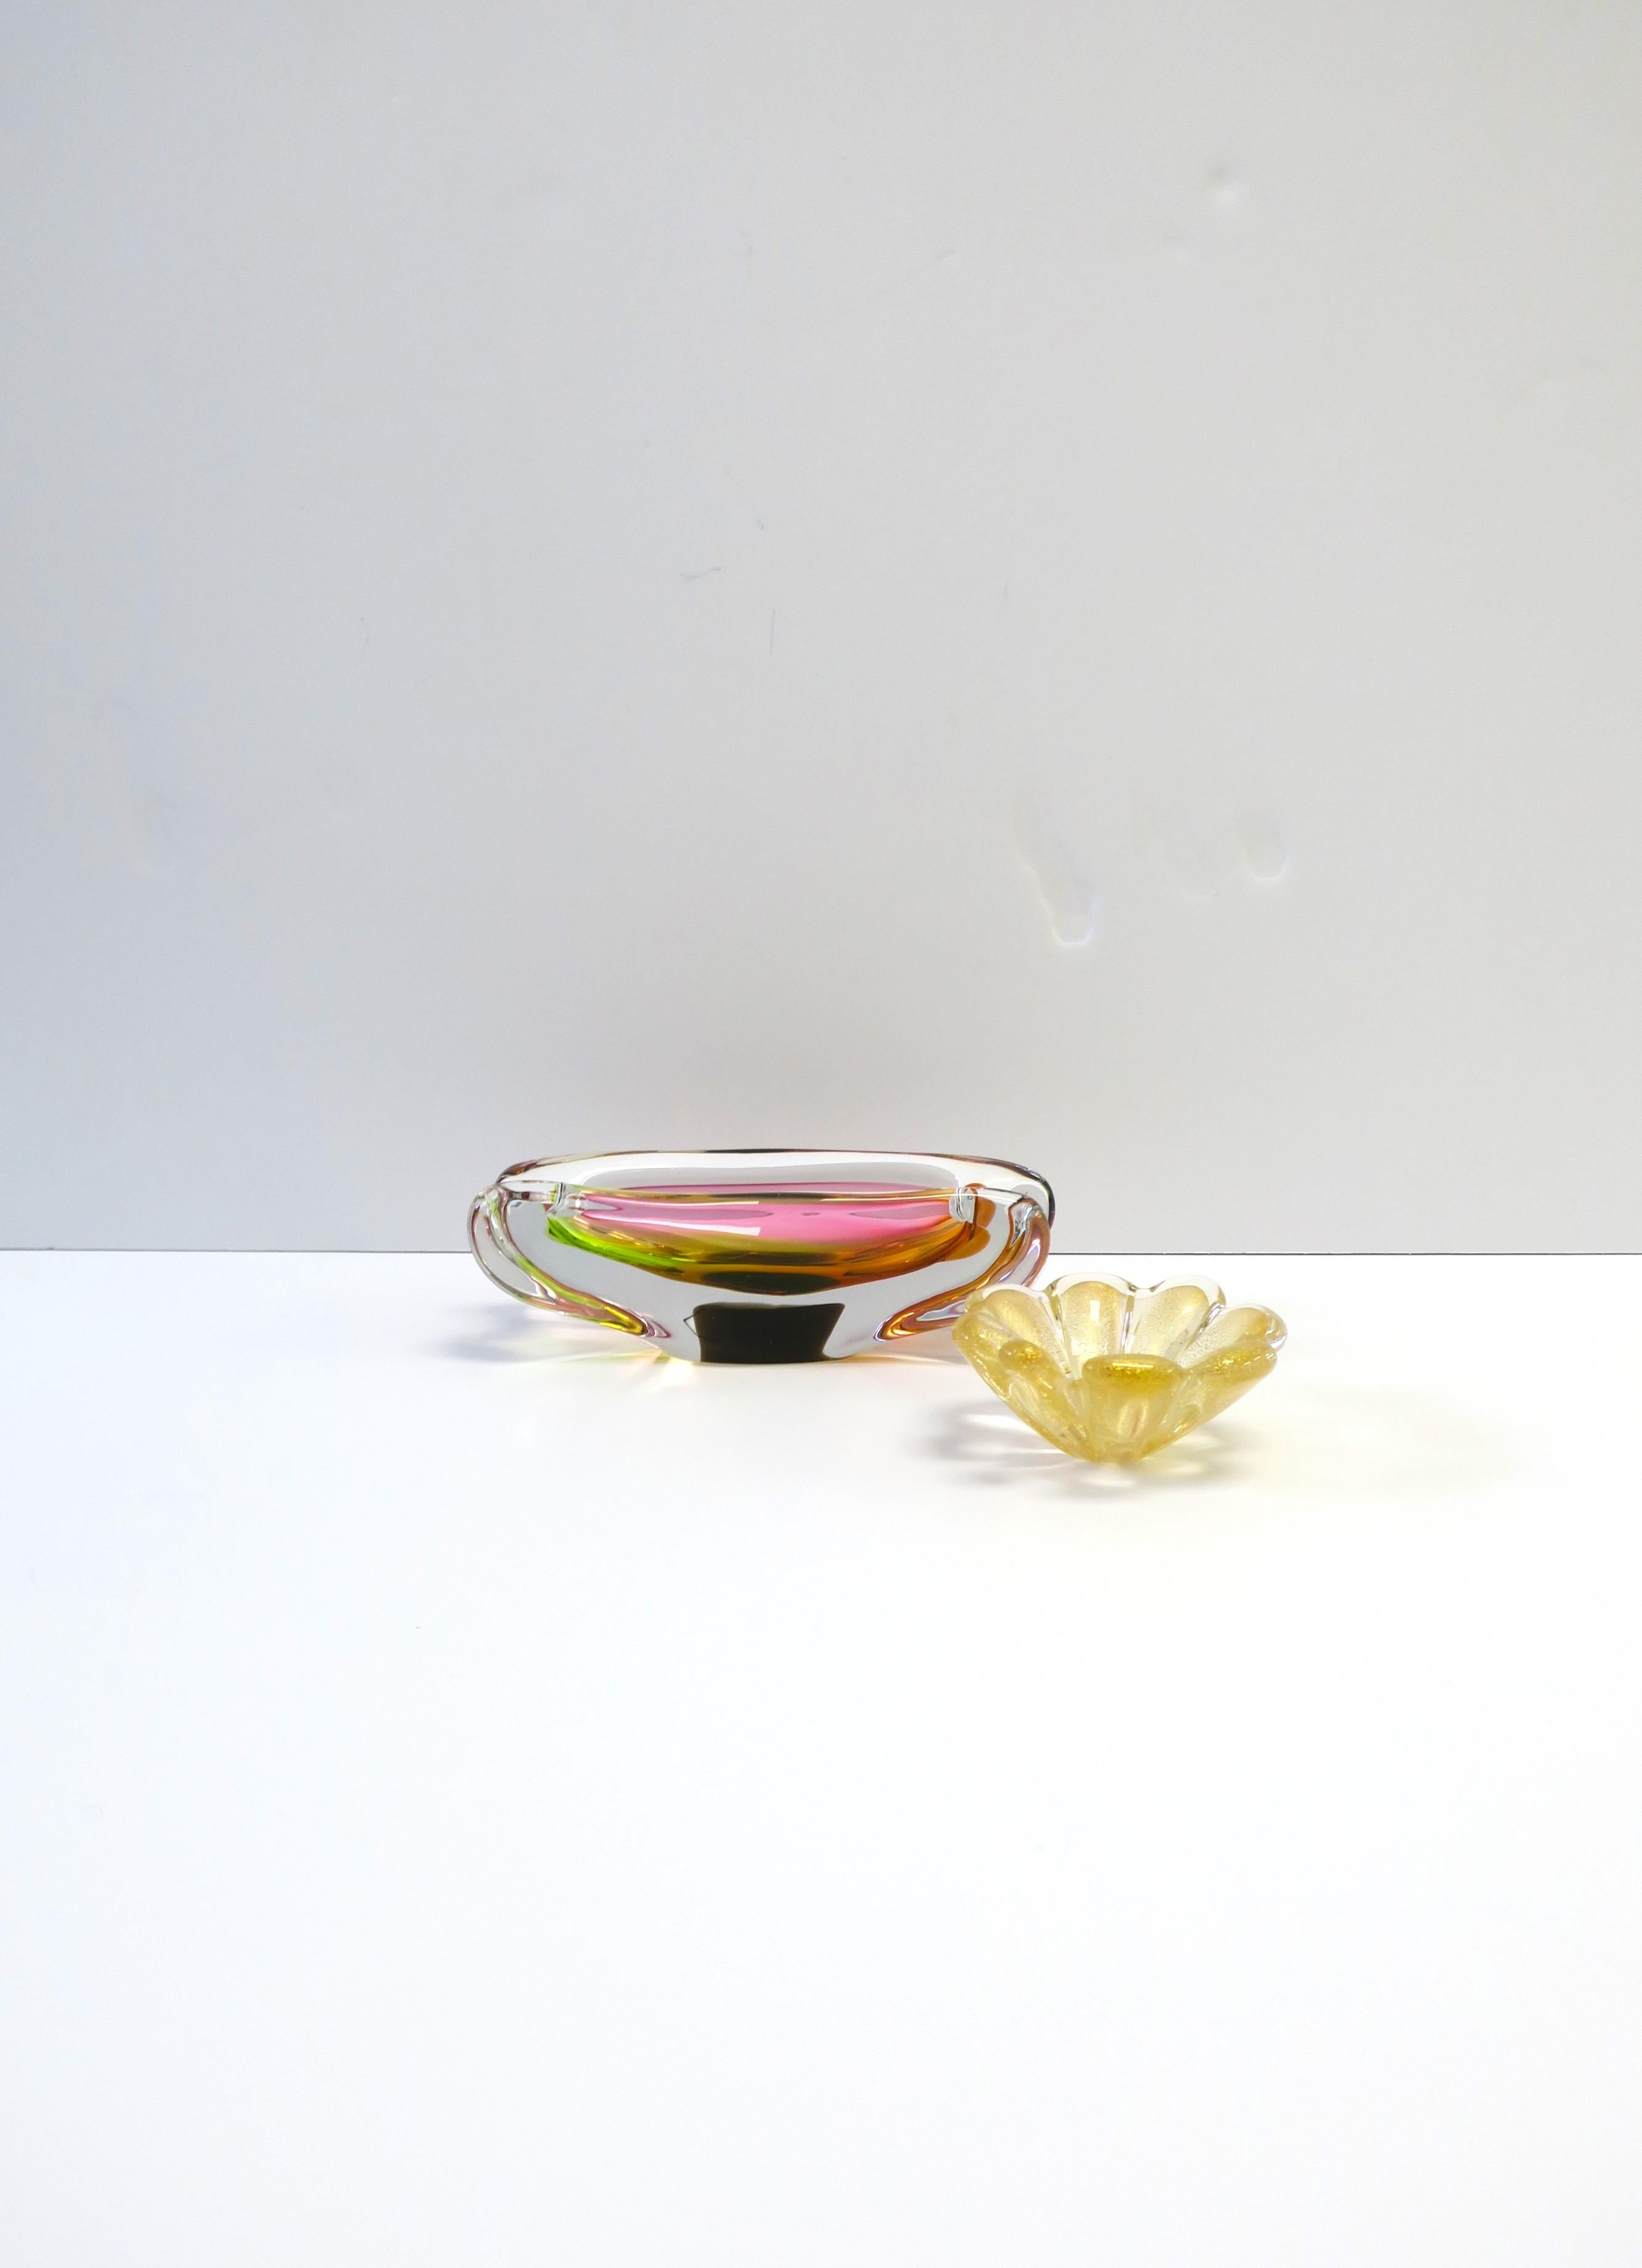 Hand-Crafted Italian Murano Bright Pink Art Glass Bowl or Ashtray